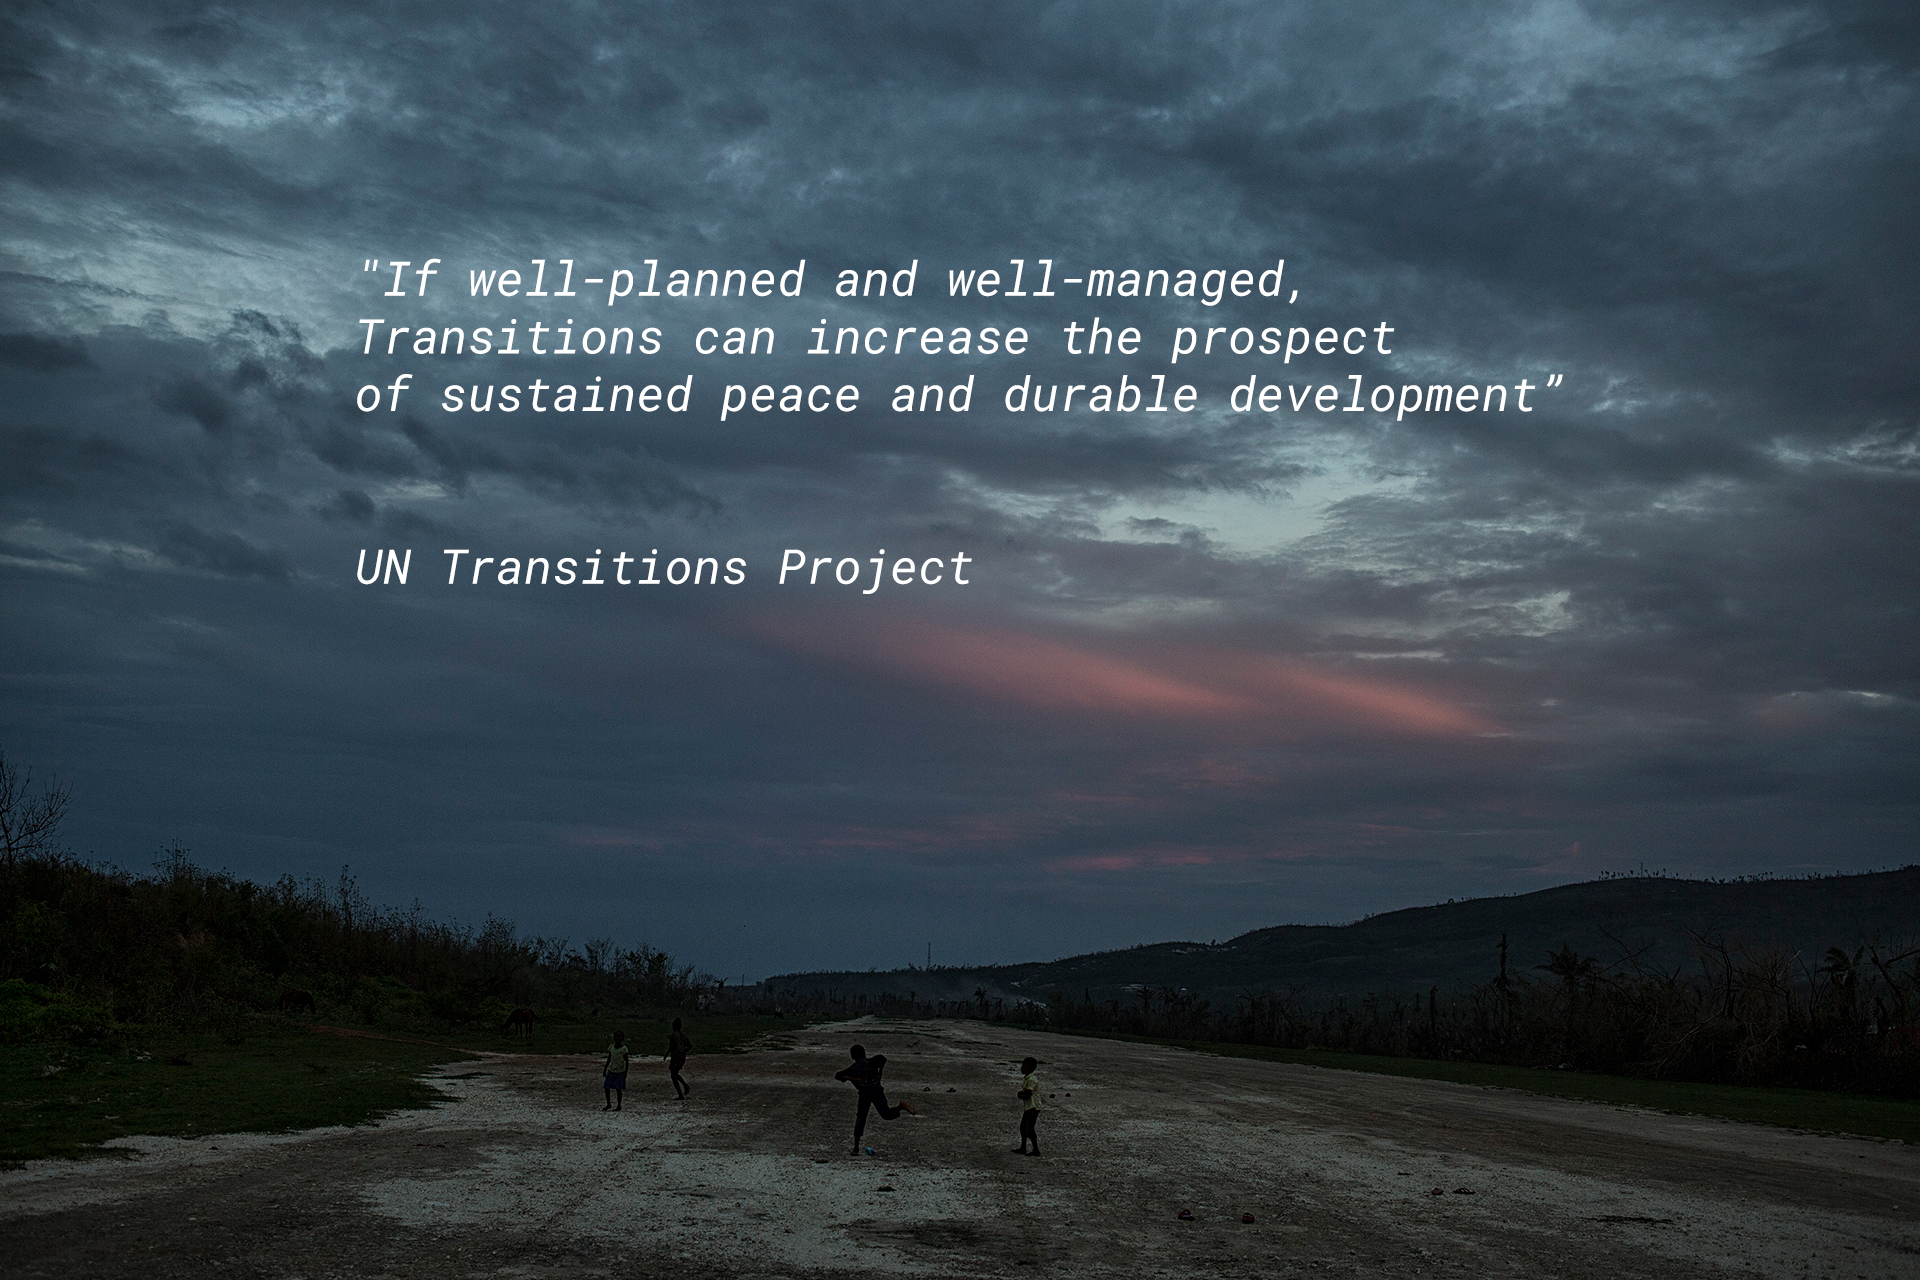 If well-planned and well-managed, Transitions can increase the prospect of sustained peace and durable development” UN Transitions Project Team